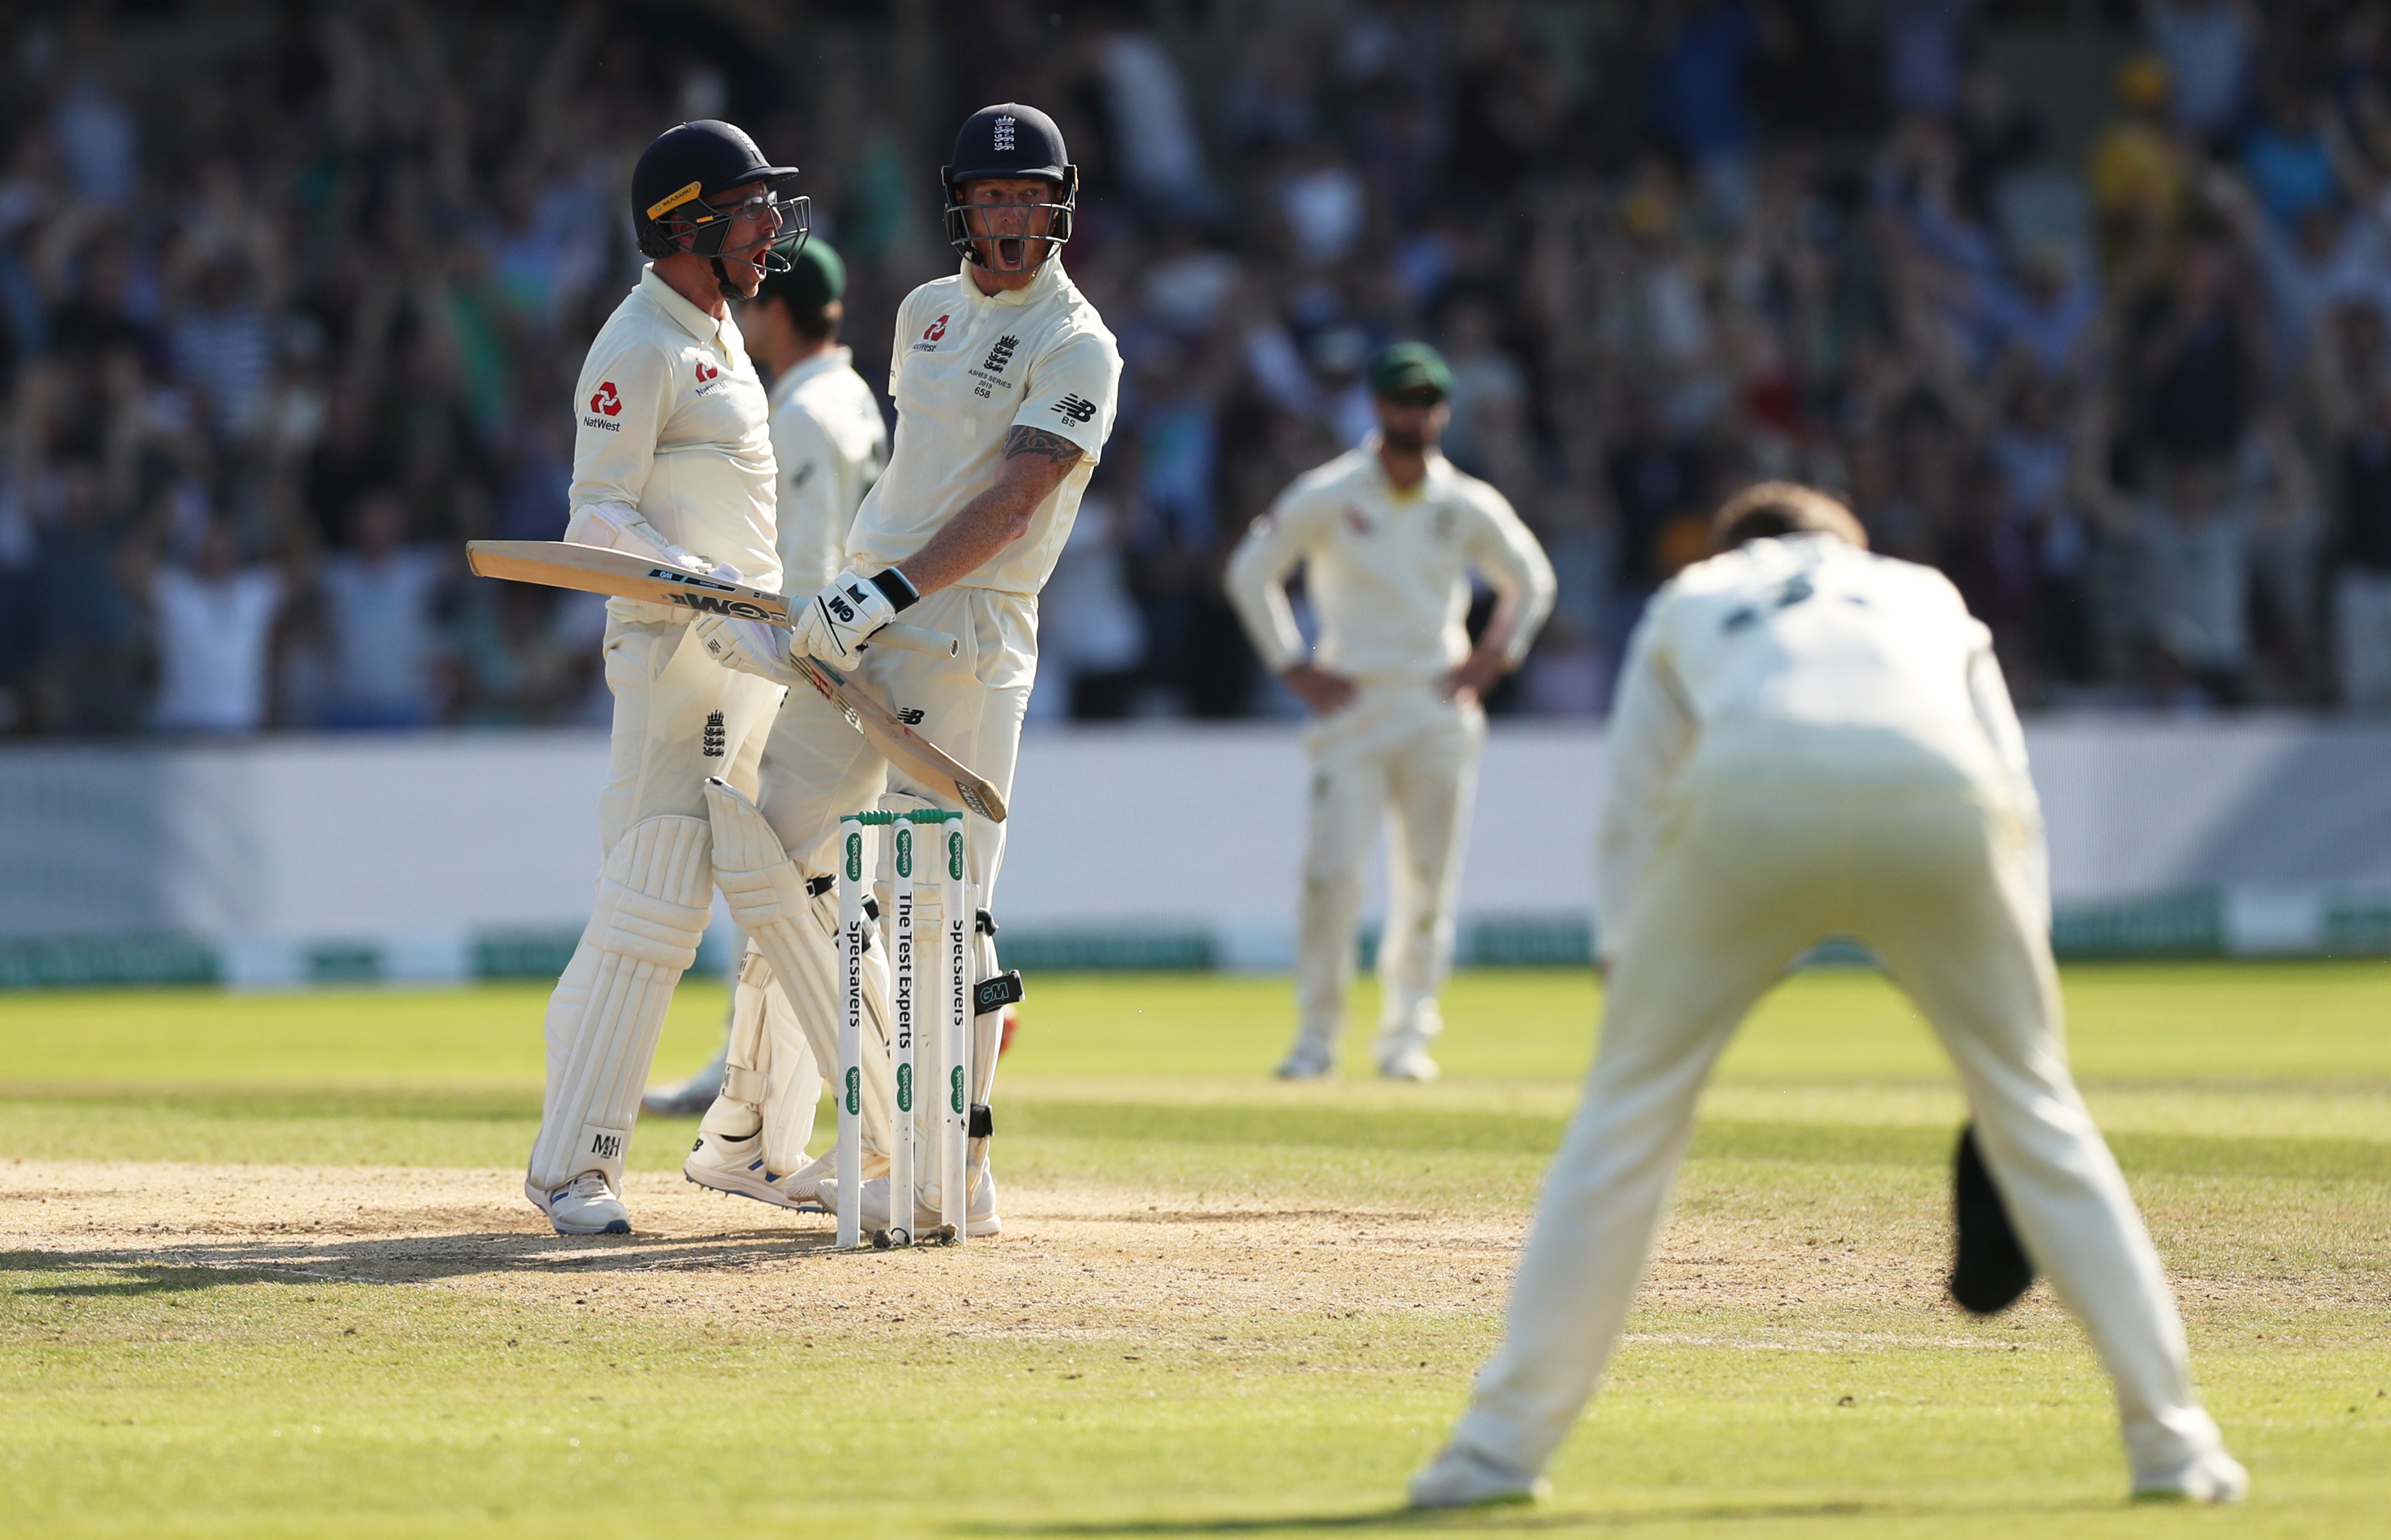 Cricket - Ashes 2019 - Third Test - England v Australia - Headingley, Leeds, Britain - August 25, 2019  England's Ben Stokes and Jack Leach celebrate winning the test  Action Images via Reuters/Lee Smith